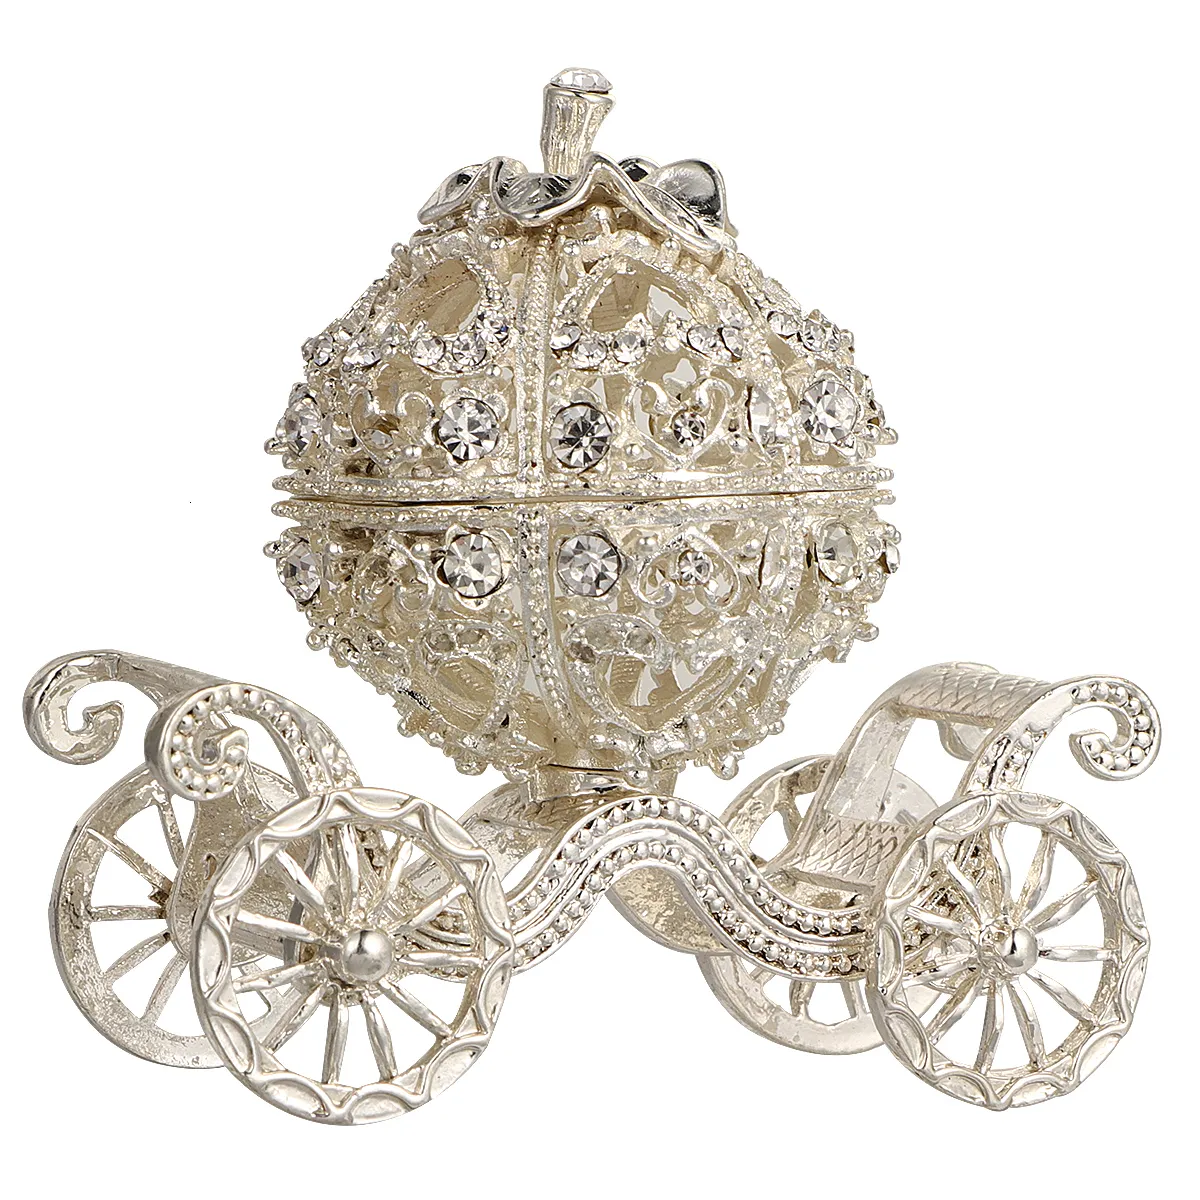 Decorative Objects Figurines Trinket Box Carriage Jewelry Chests Creative Gift Ornament Crystal Pumpkin Carriage bags accessories gift 230422